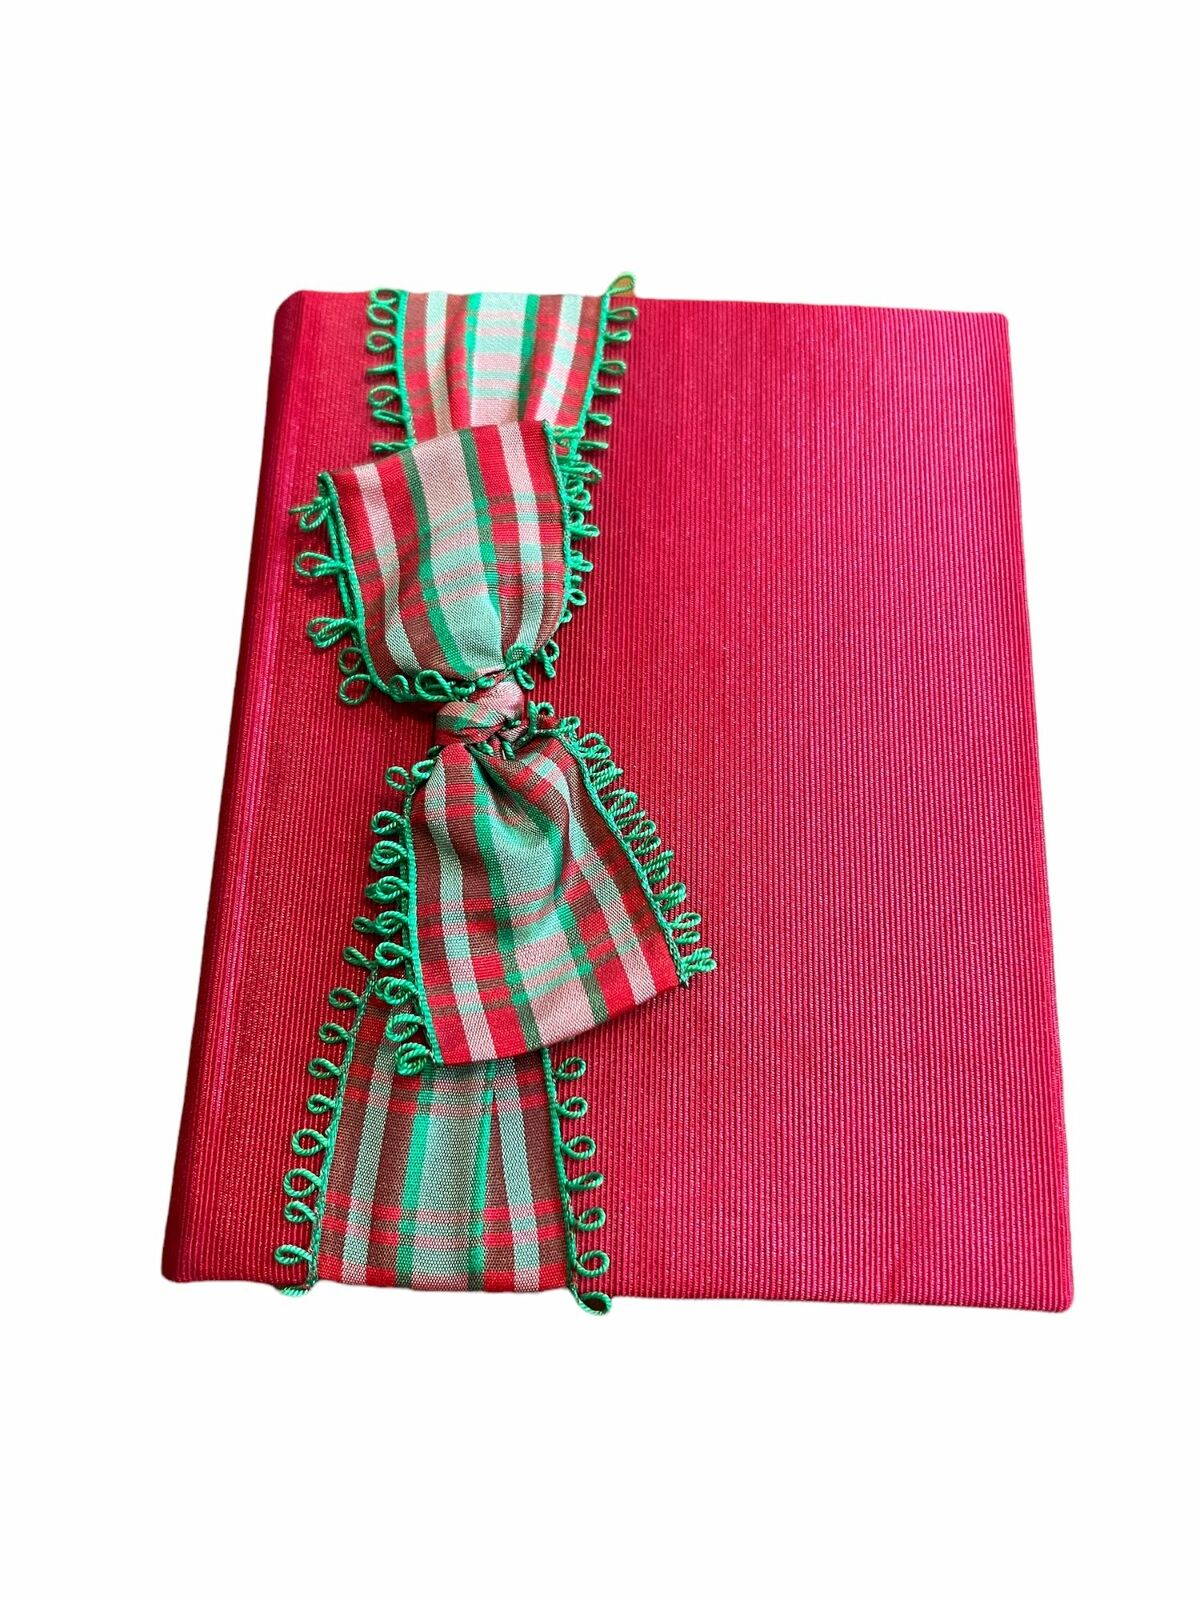 Trends Photo Album Brag Book Red Green Red Ribbon 36 4x6 photo...